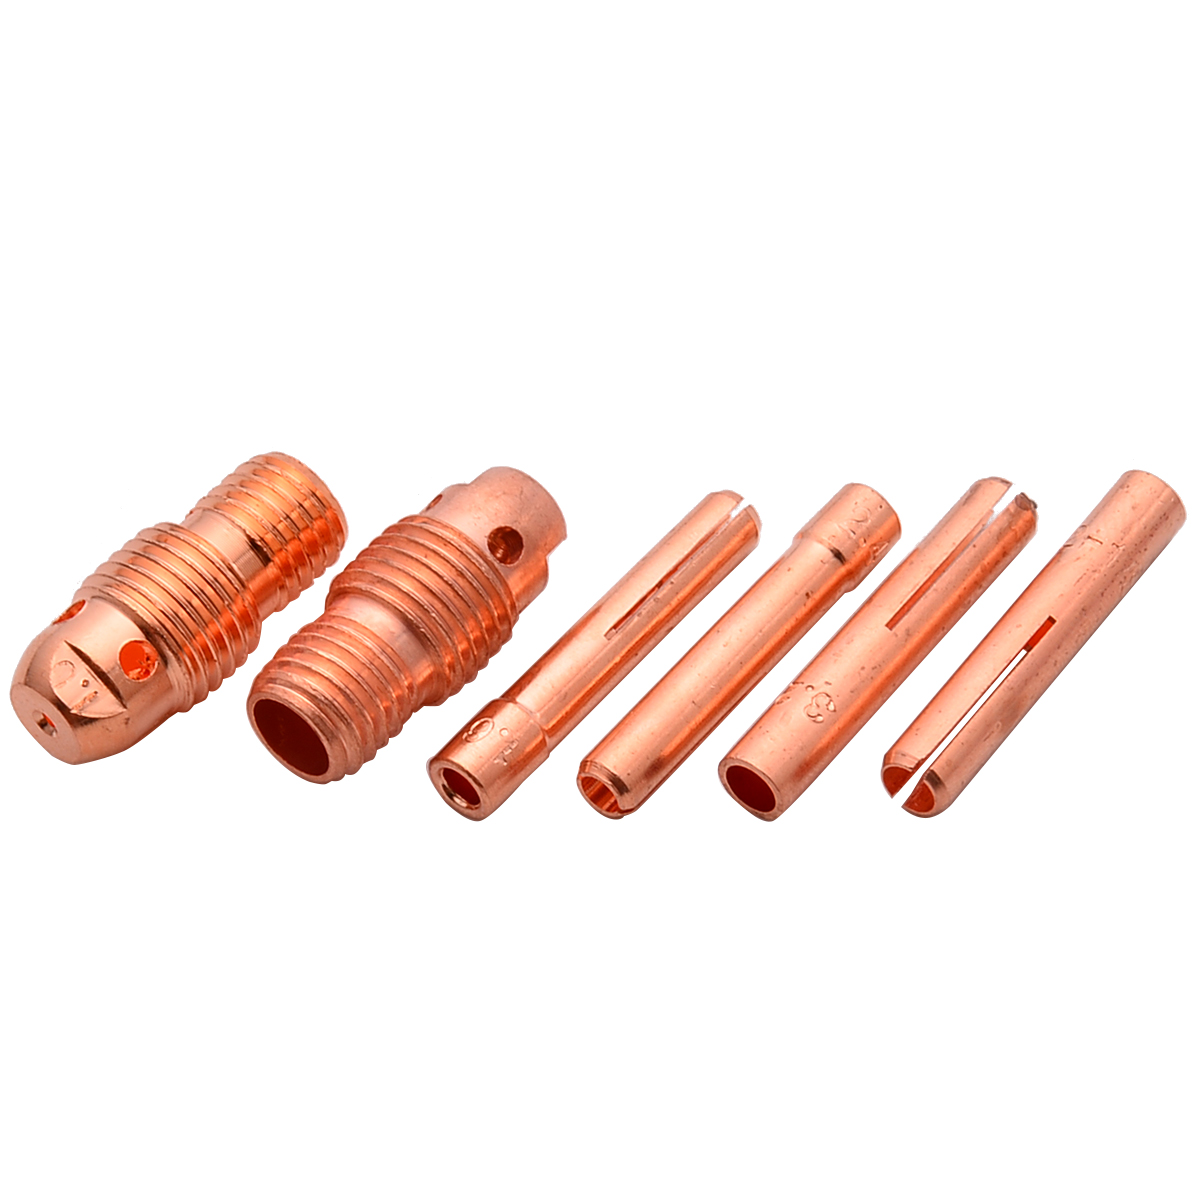 53Pcs Durable Welding Torch Body Parts Gas Lens Nozzle Collet Cup Kit For TIG Welding Torch WP-9 20 25 Series